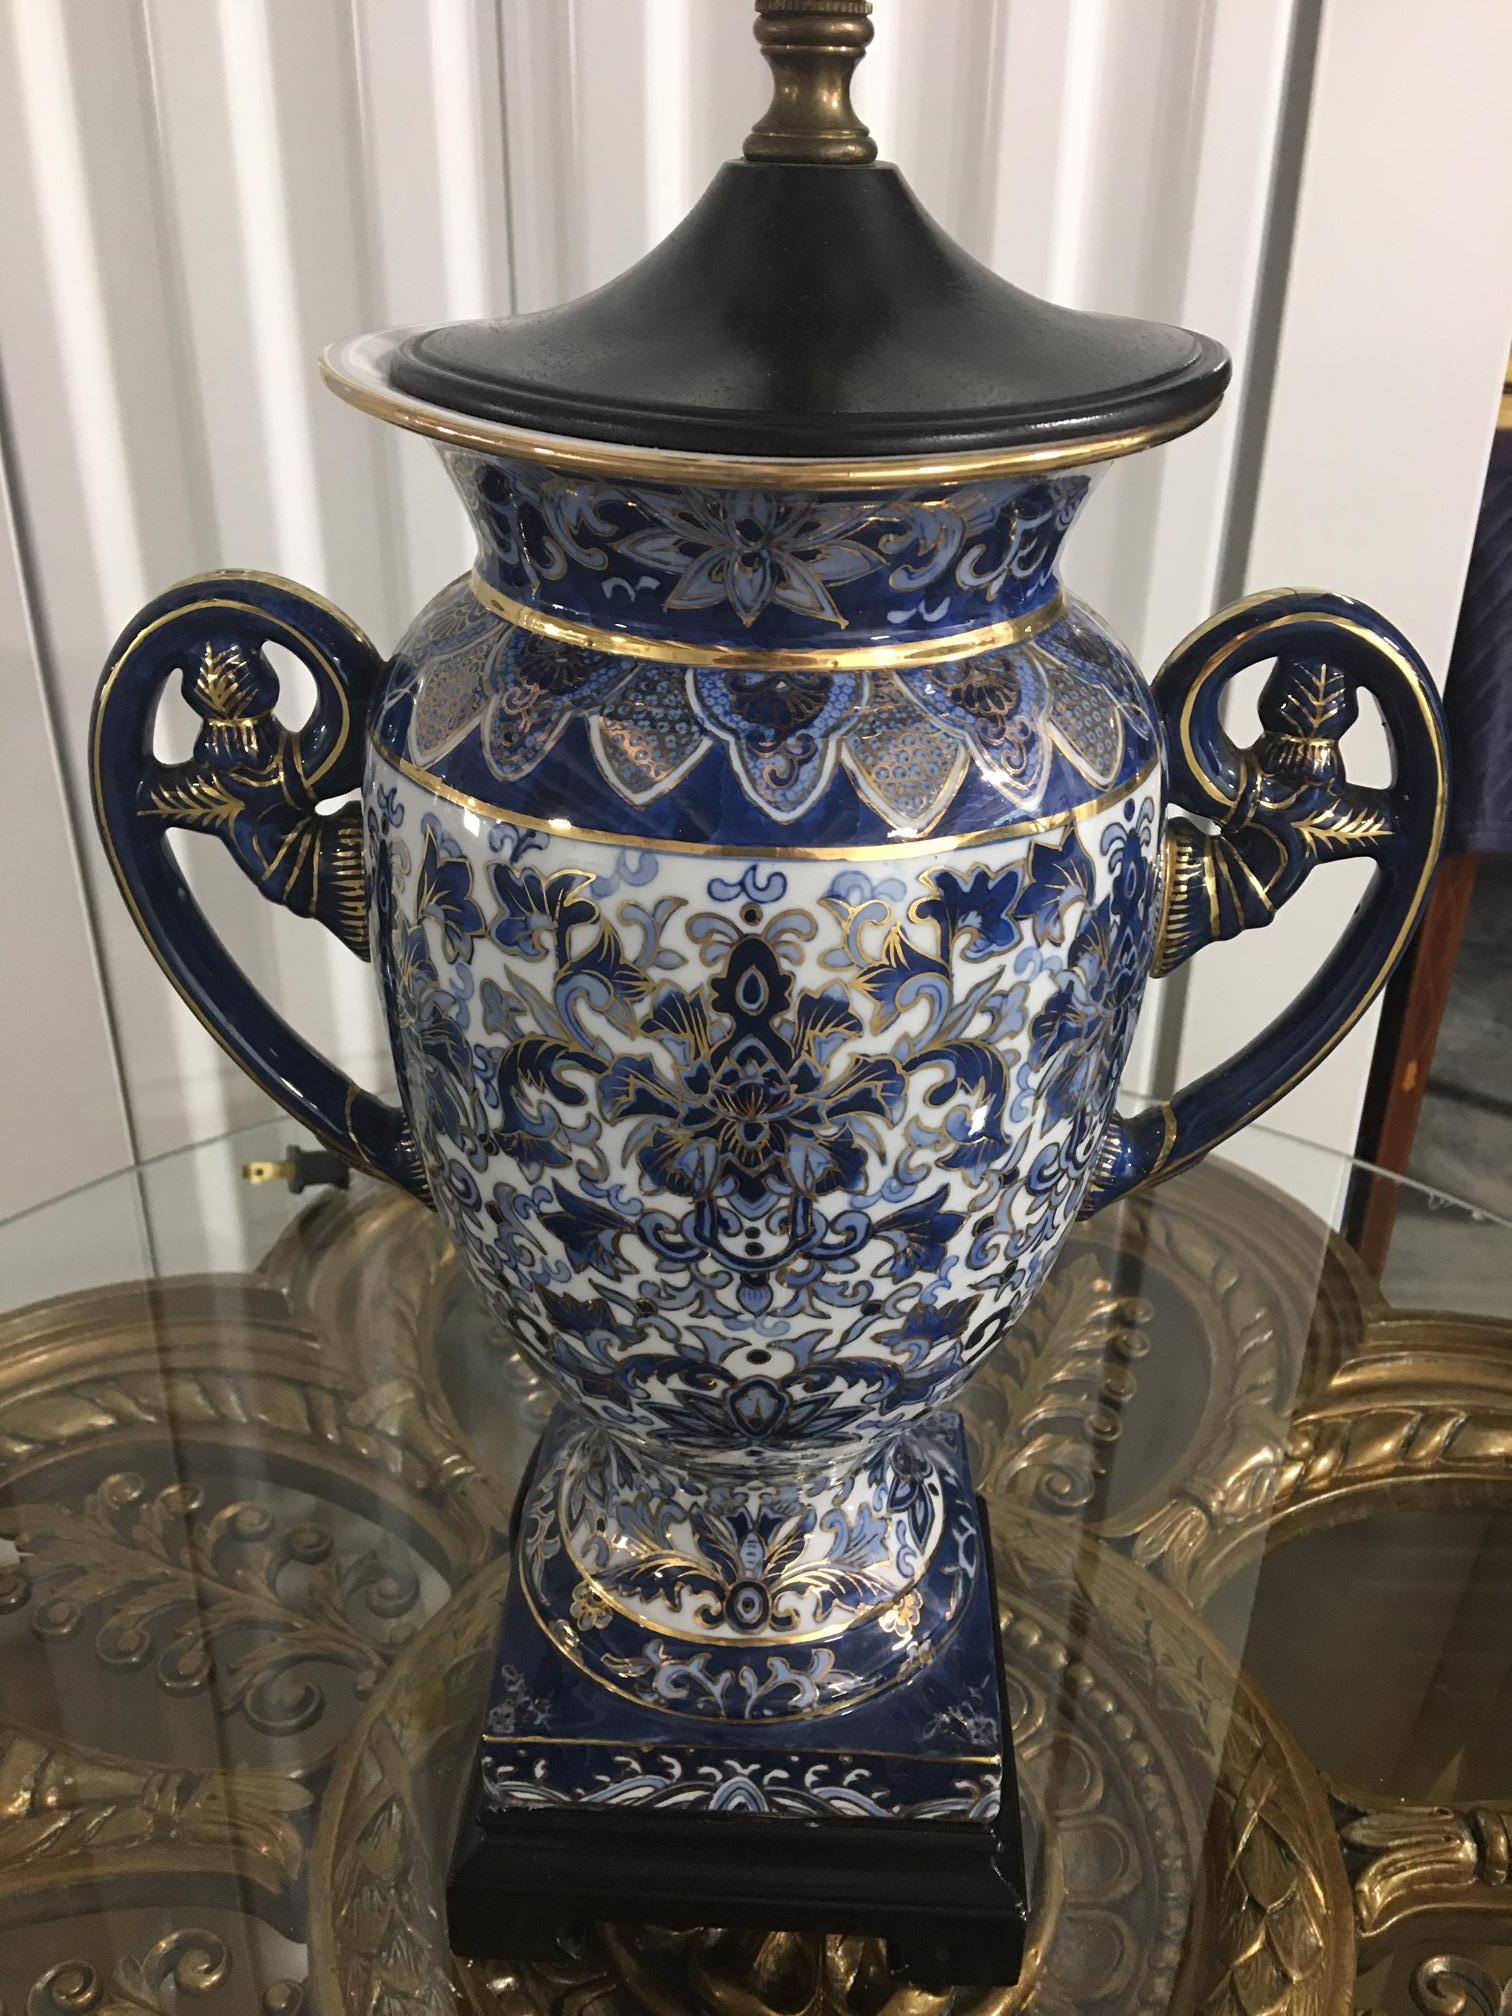 Porcelain Blue and White Asian Motif Lamp with Handles, 20th Century